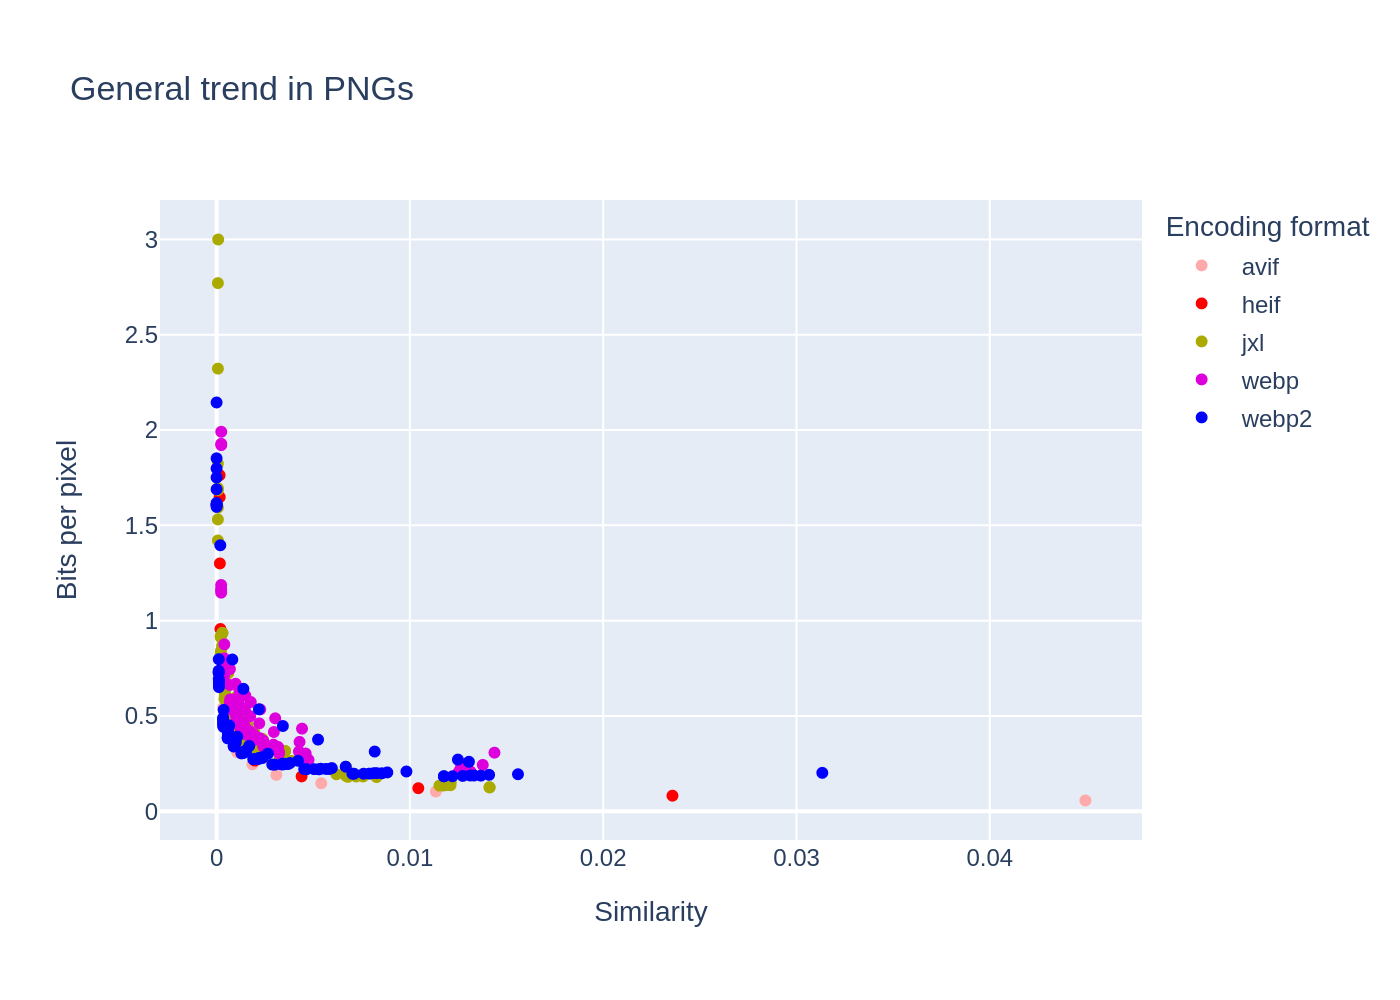 General trend in PNGs, compression ratio as a function of quality for different image formats